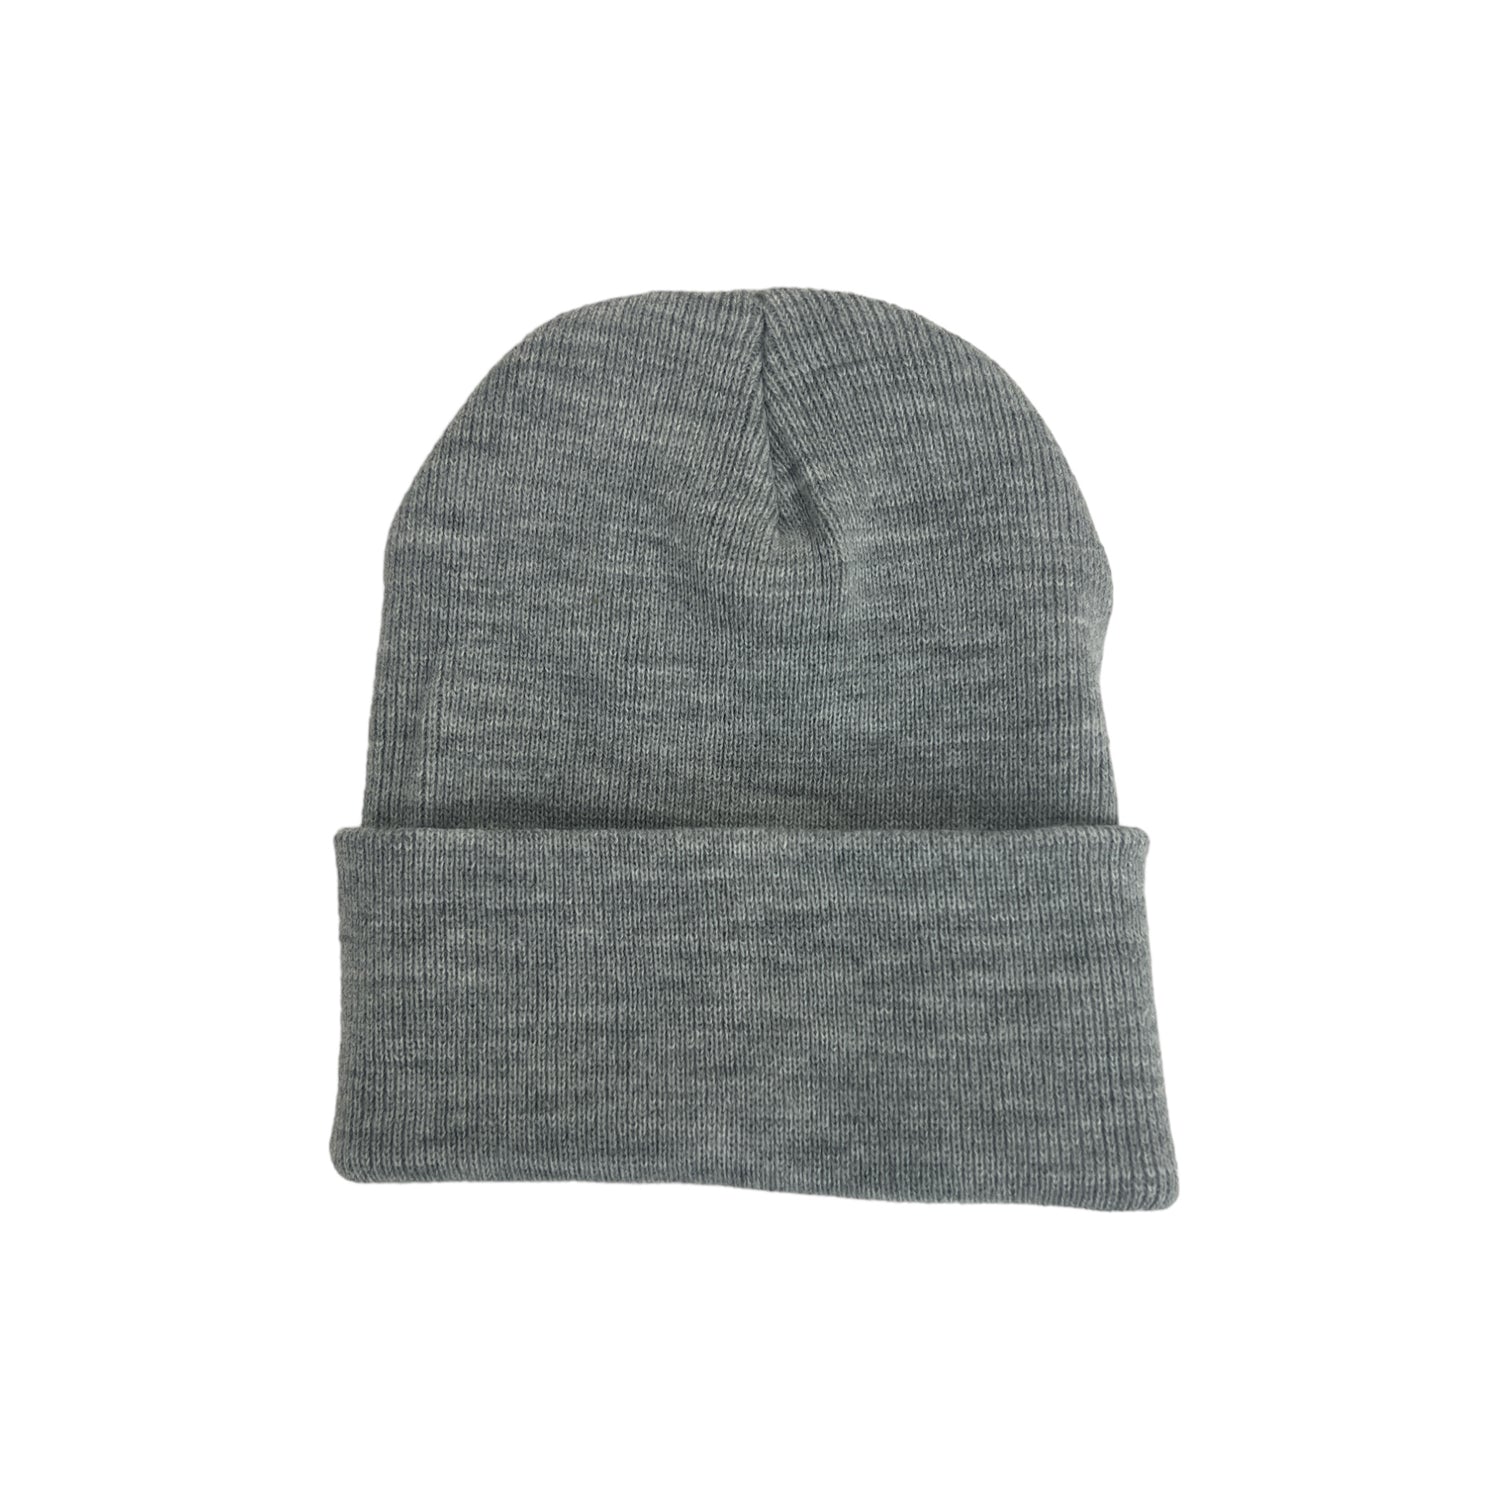 Back of the Fish Sticks classic grey beanie.